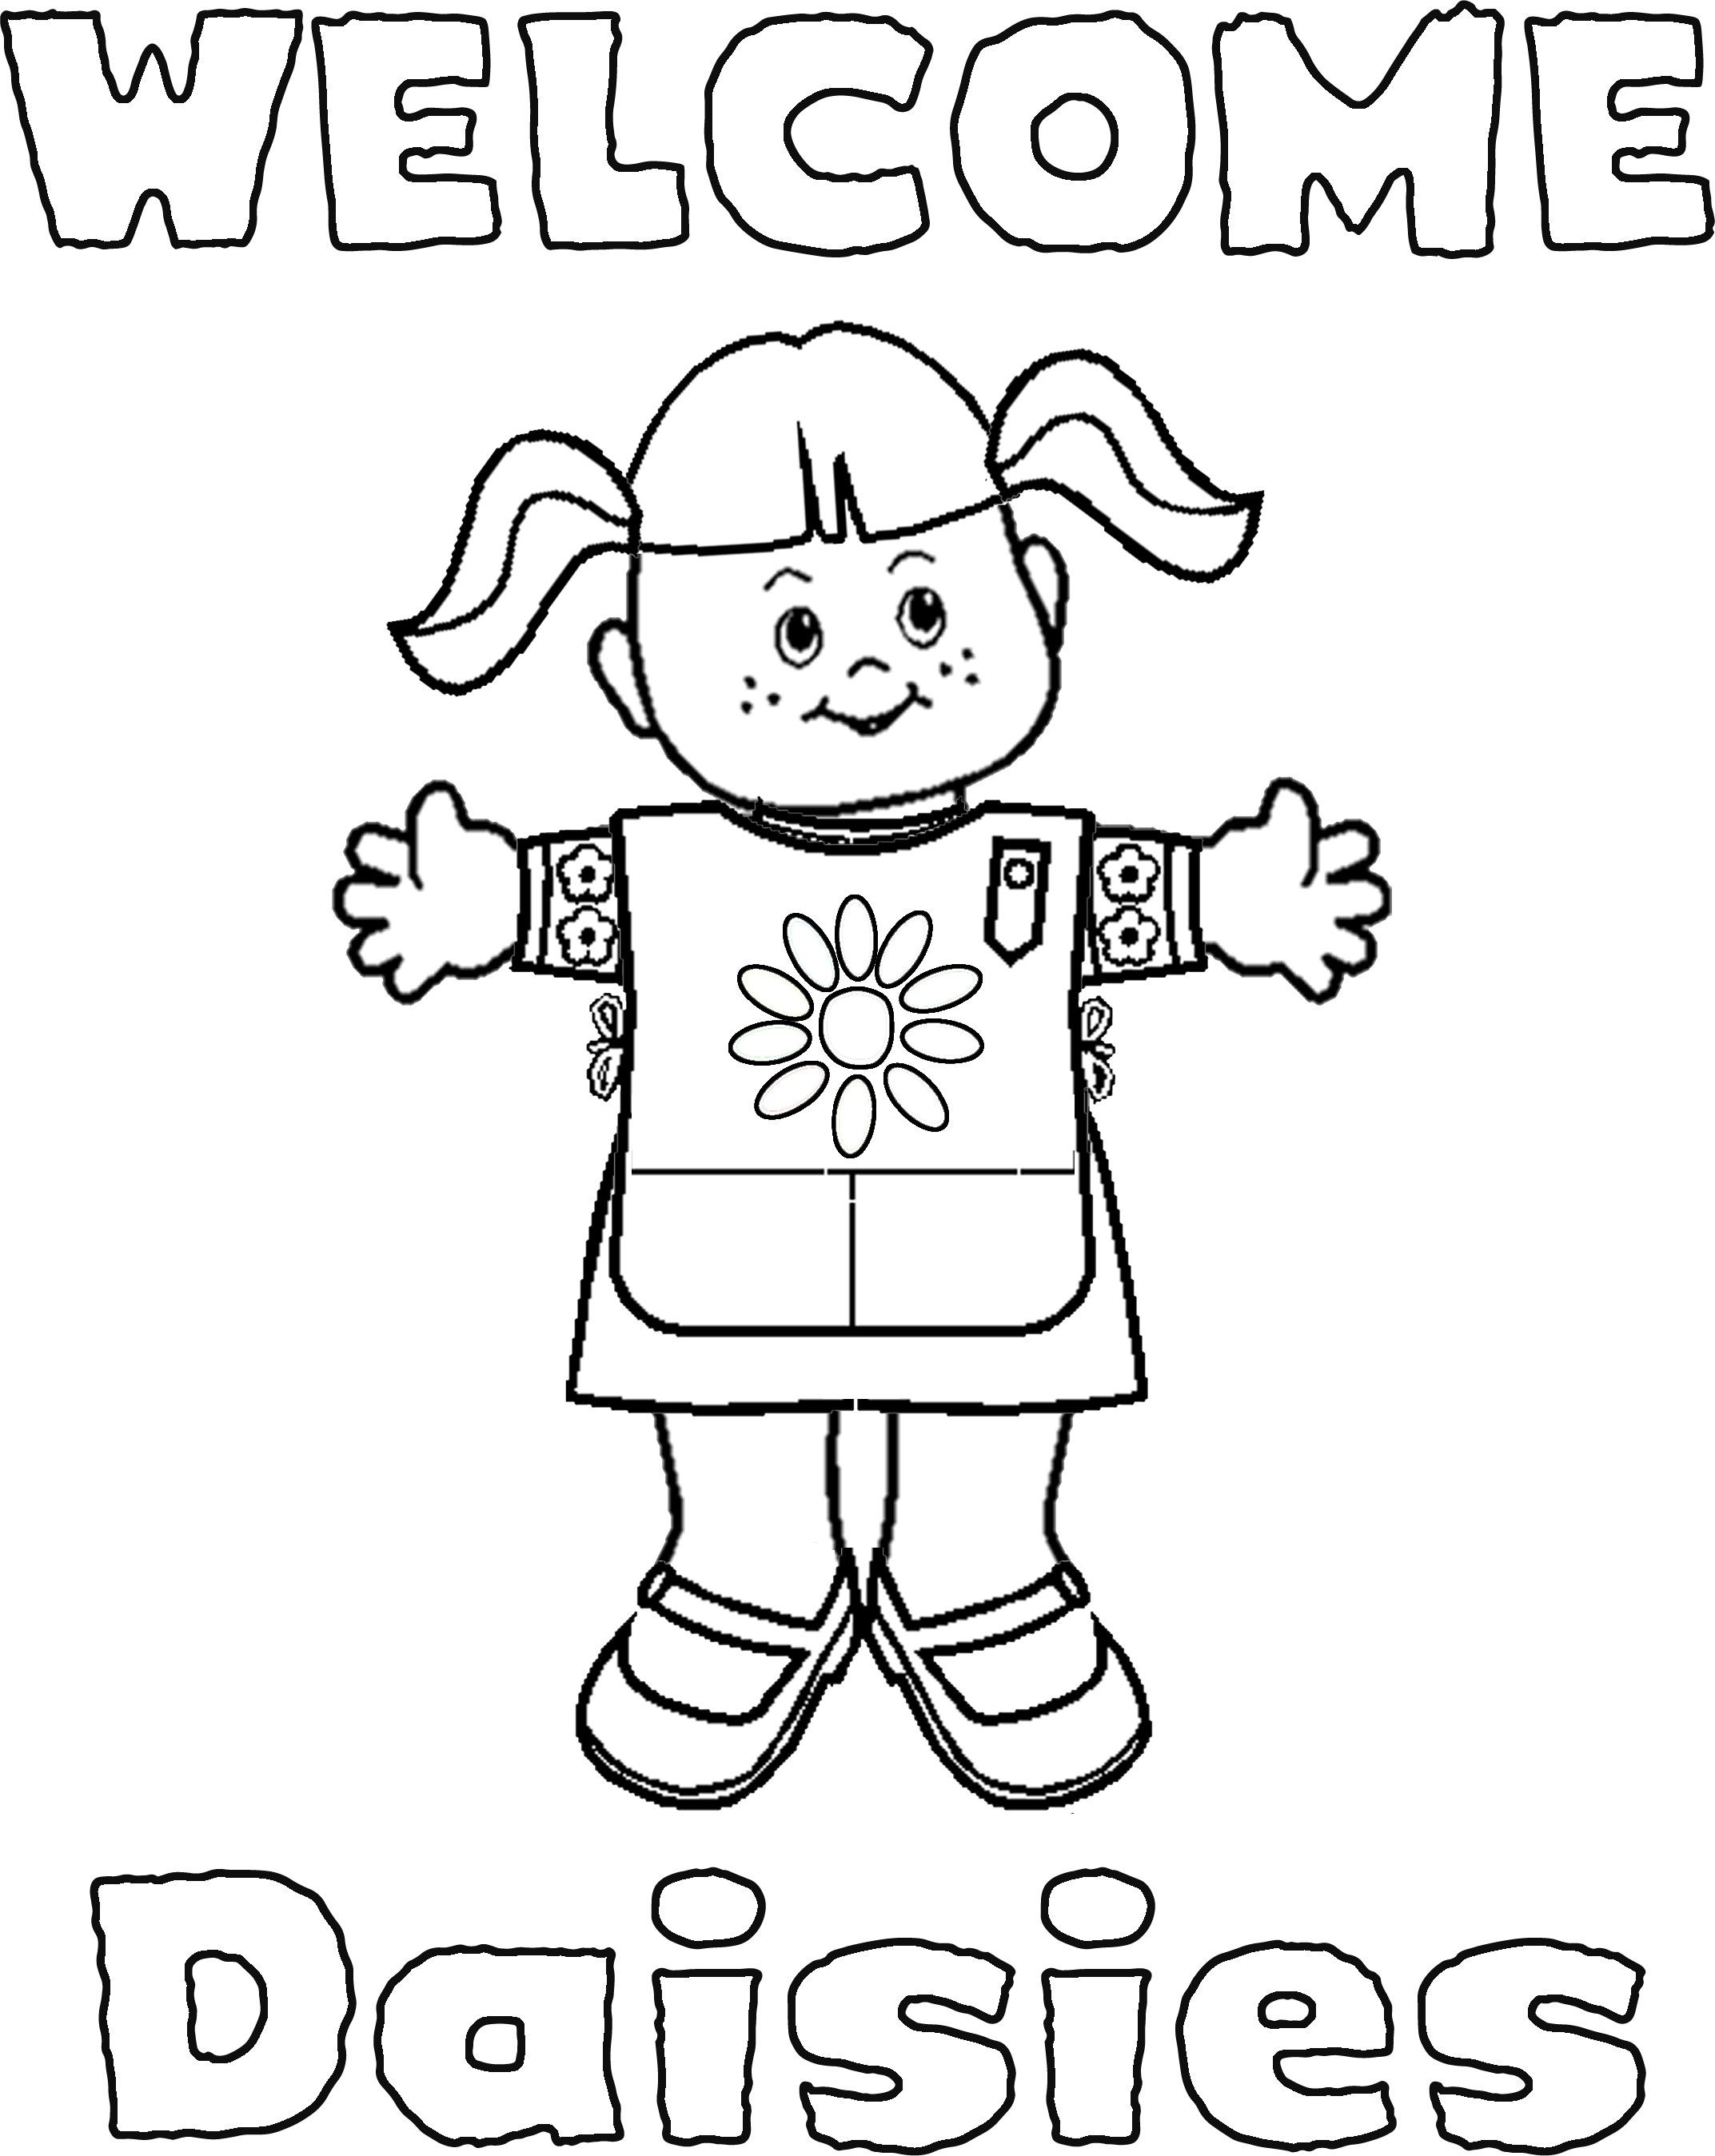 1000+ images about Daisy Coloring Pages on Pinterest | Girl scout ...